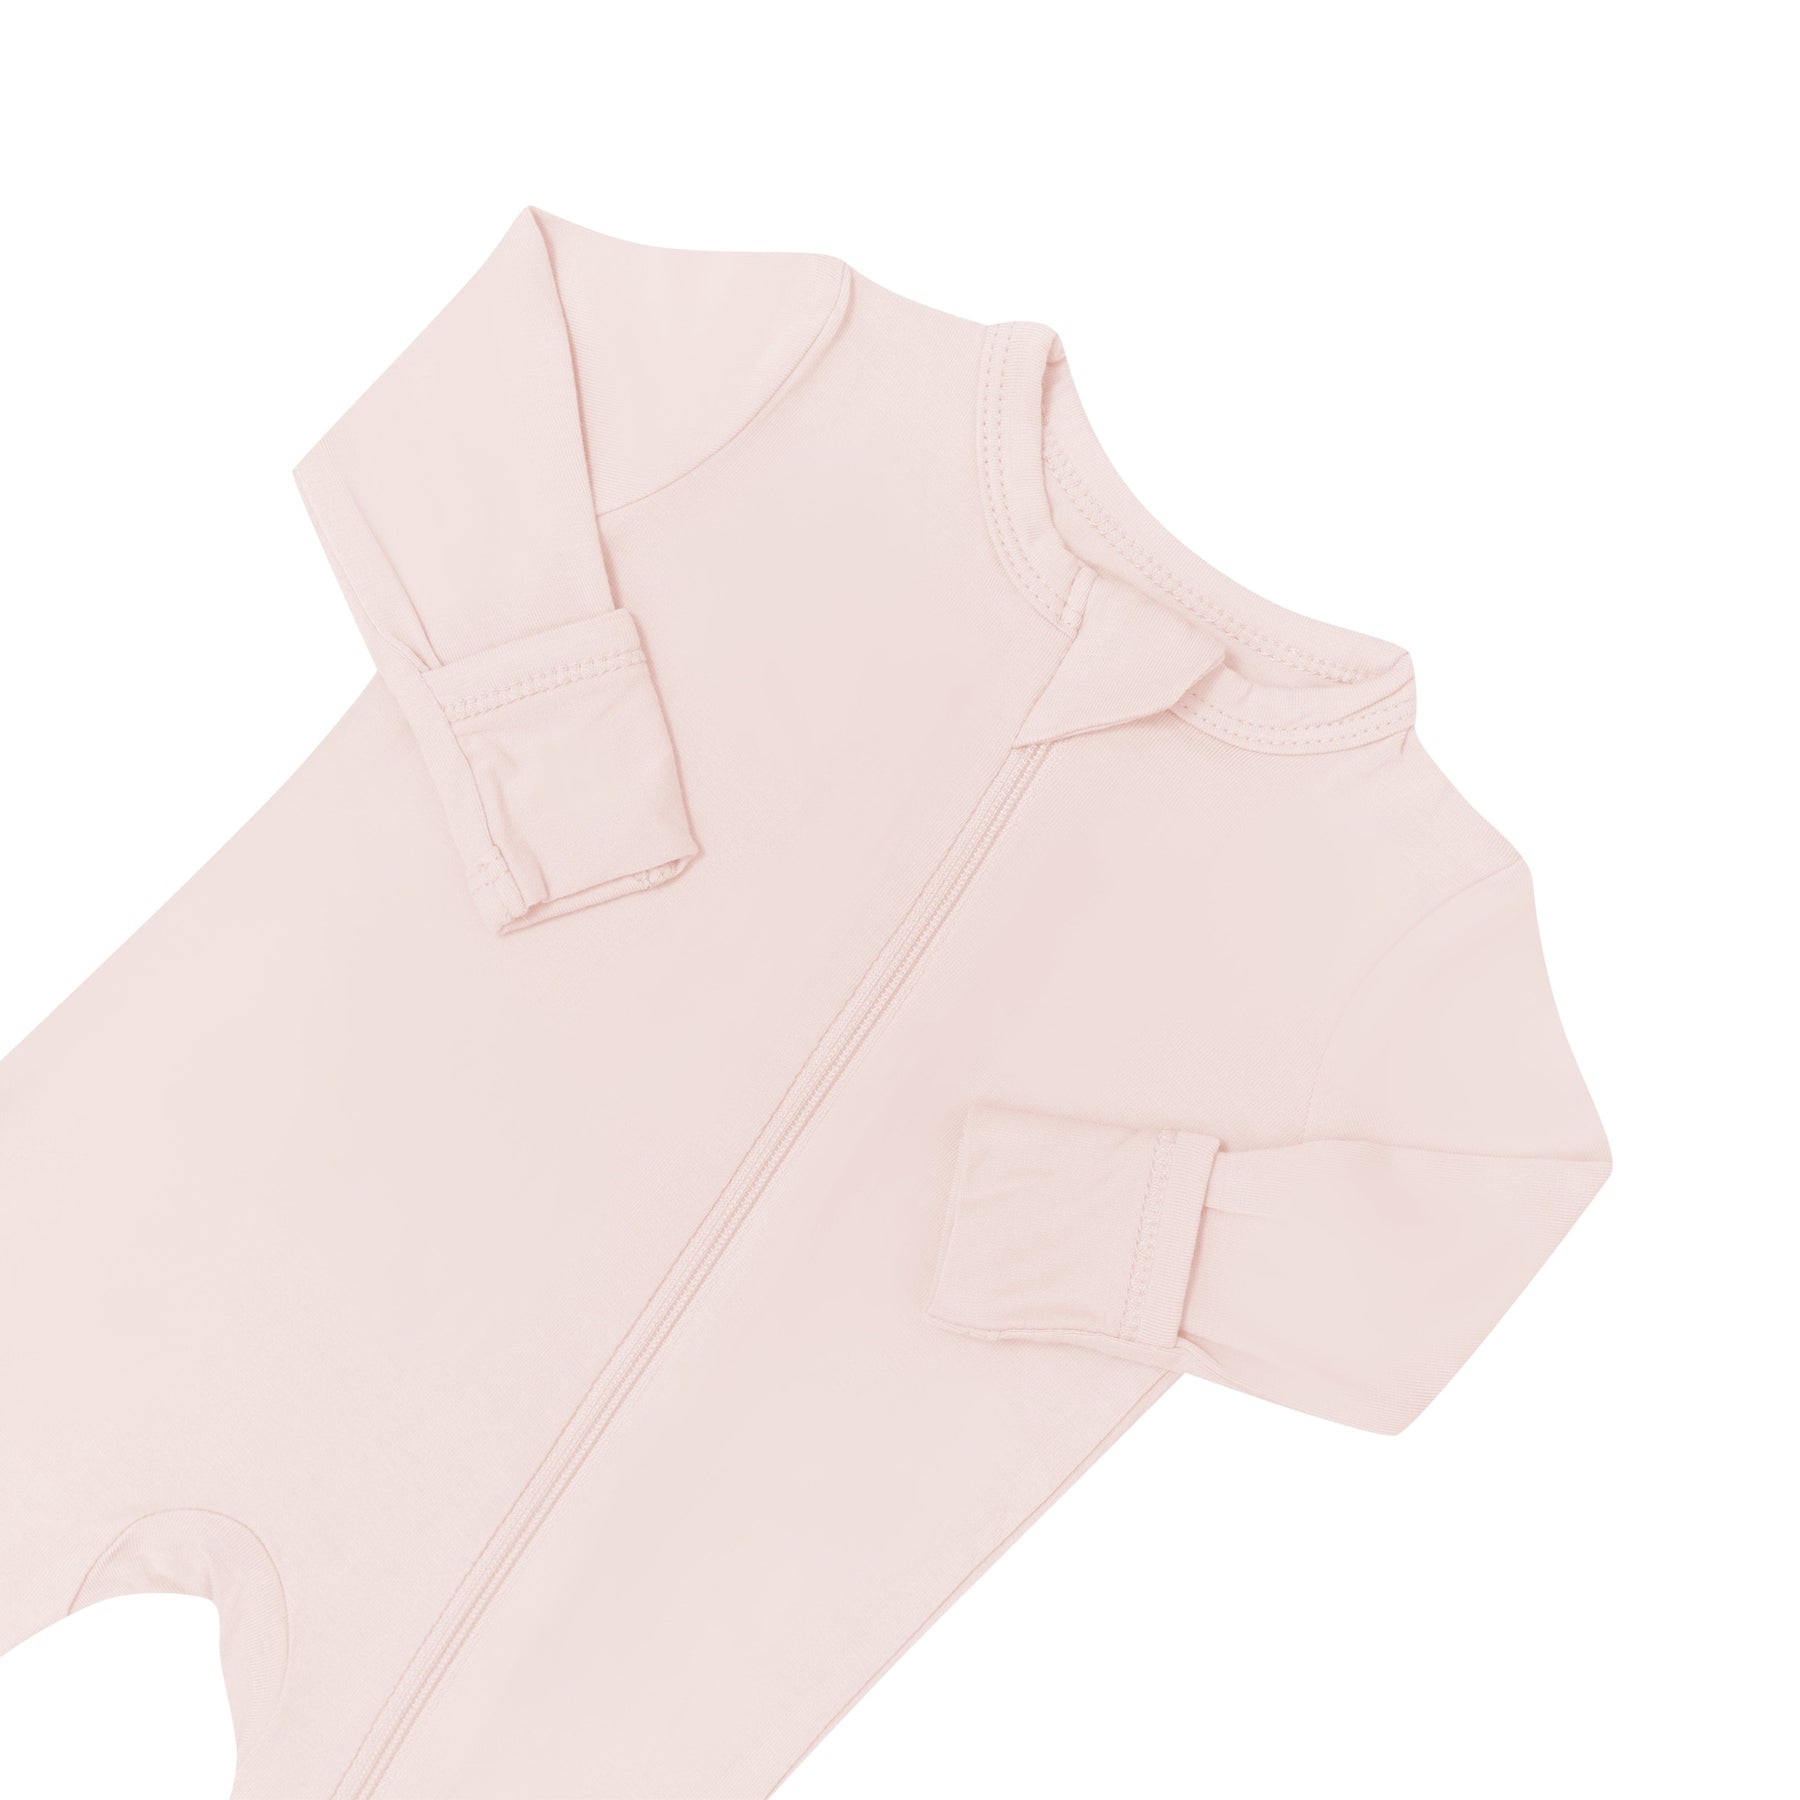 Zipper garage and fold over cuffs on Kyte Baby bamboo Zippered Romper in Blush